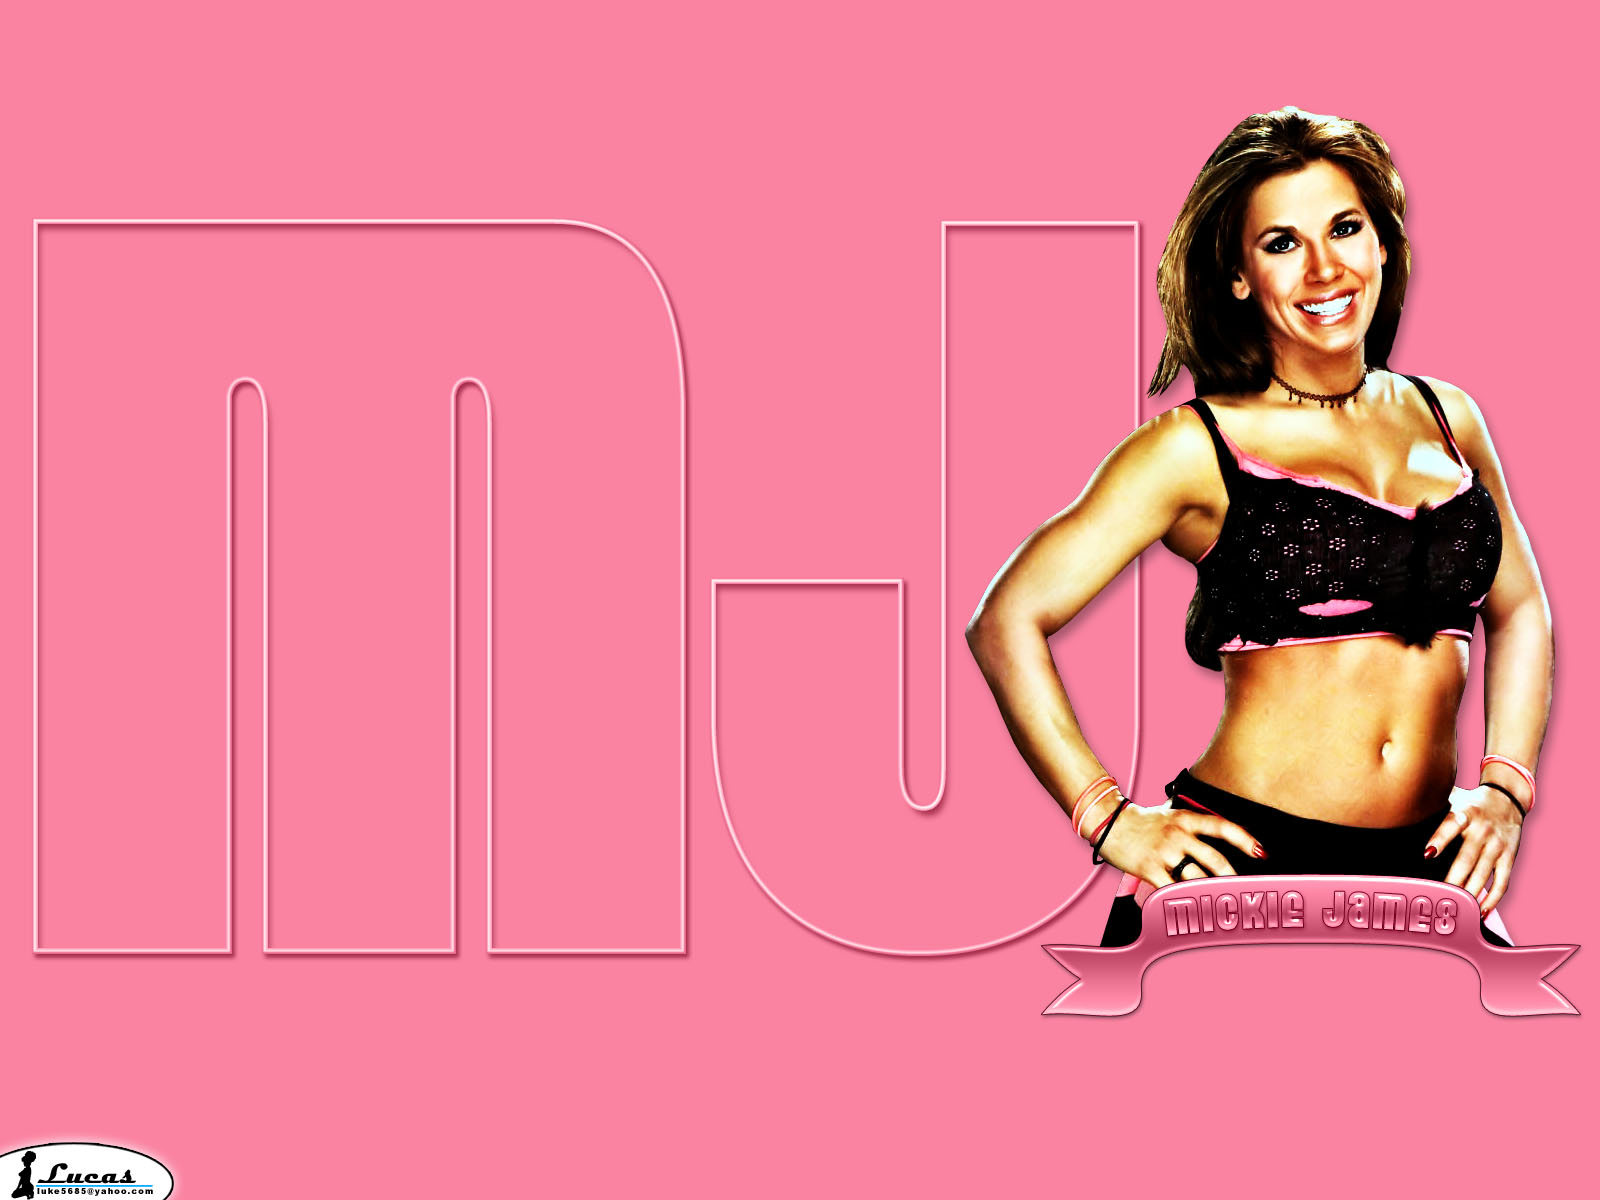 Download High quality Mickie James wallpaper / Celebrities Female / 1600x1200